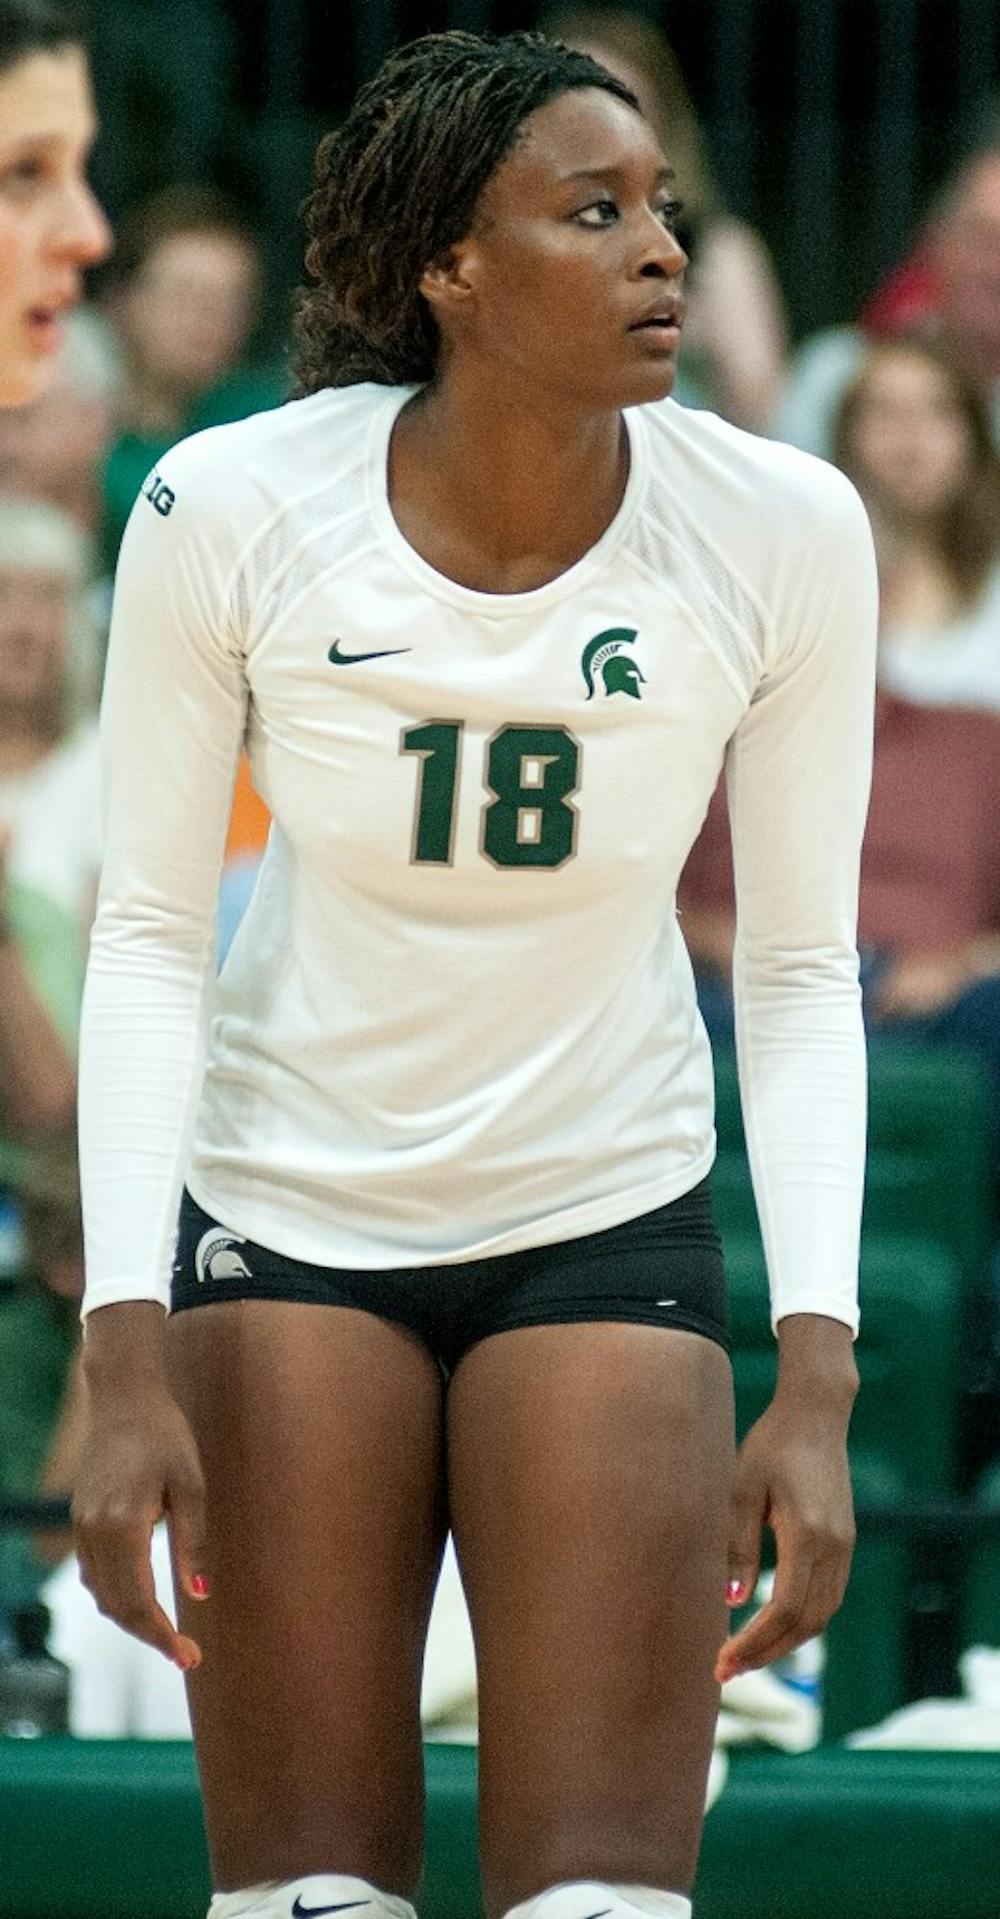 Junior middleblocker Alexis Mathews at the game on Friday, Sept. 7, 2012 at Jenison Field House. MSU defeated IPFW, 3-2. Justin Wan/The State News